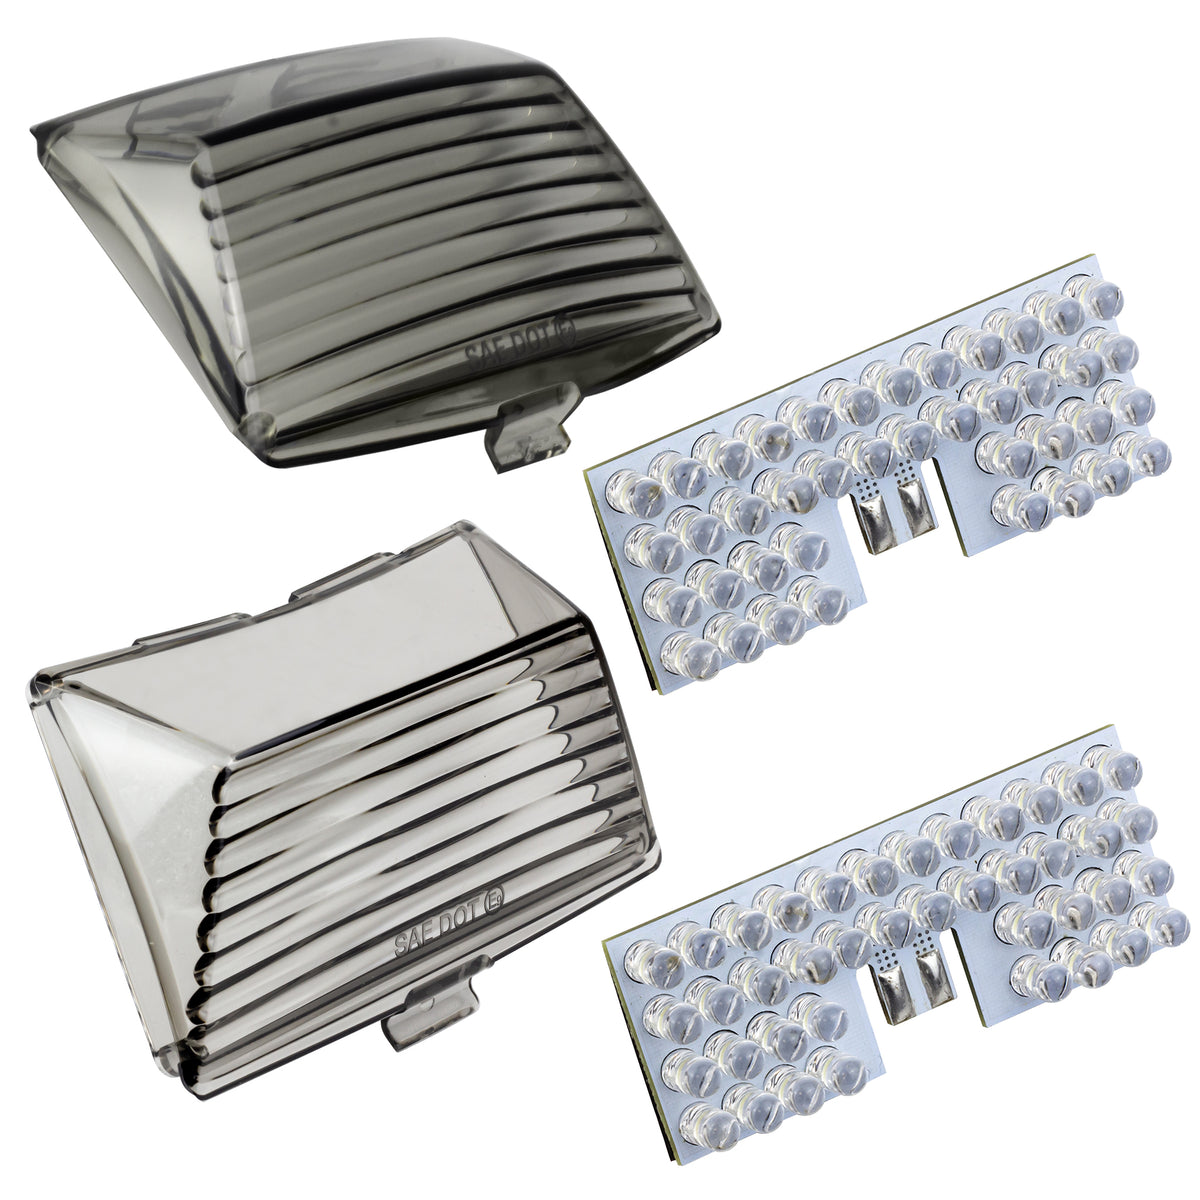 Eagle Lights LED Front and Rear Fender Tip Lights with Smoked Lenses for Harley Davidson Motorcycles